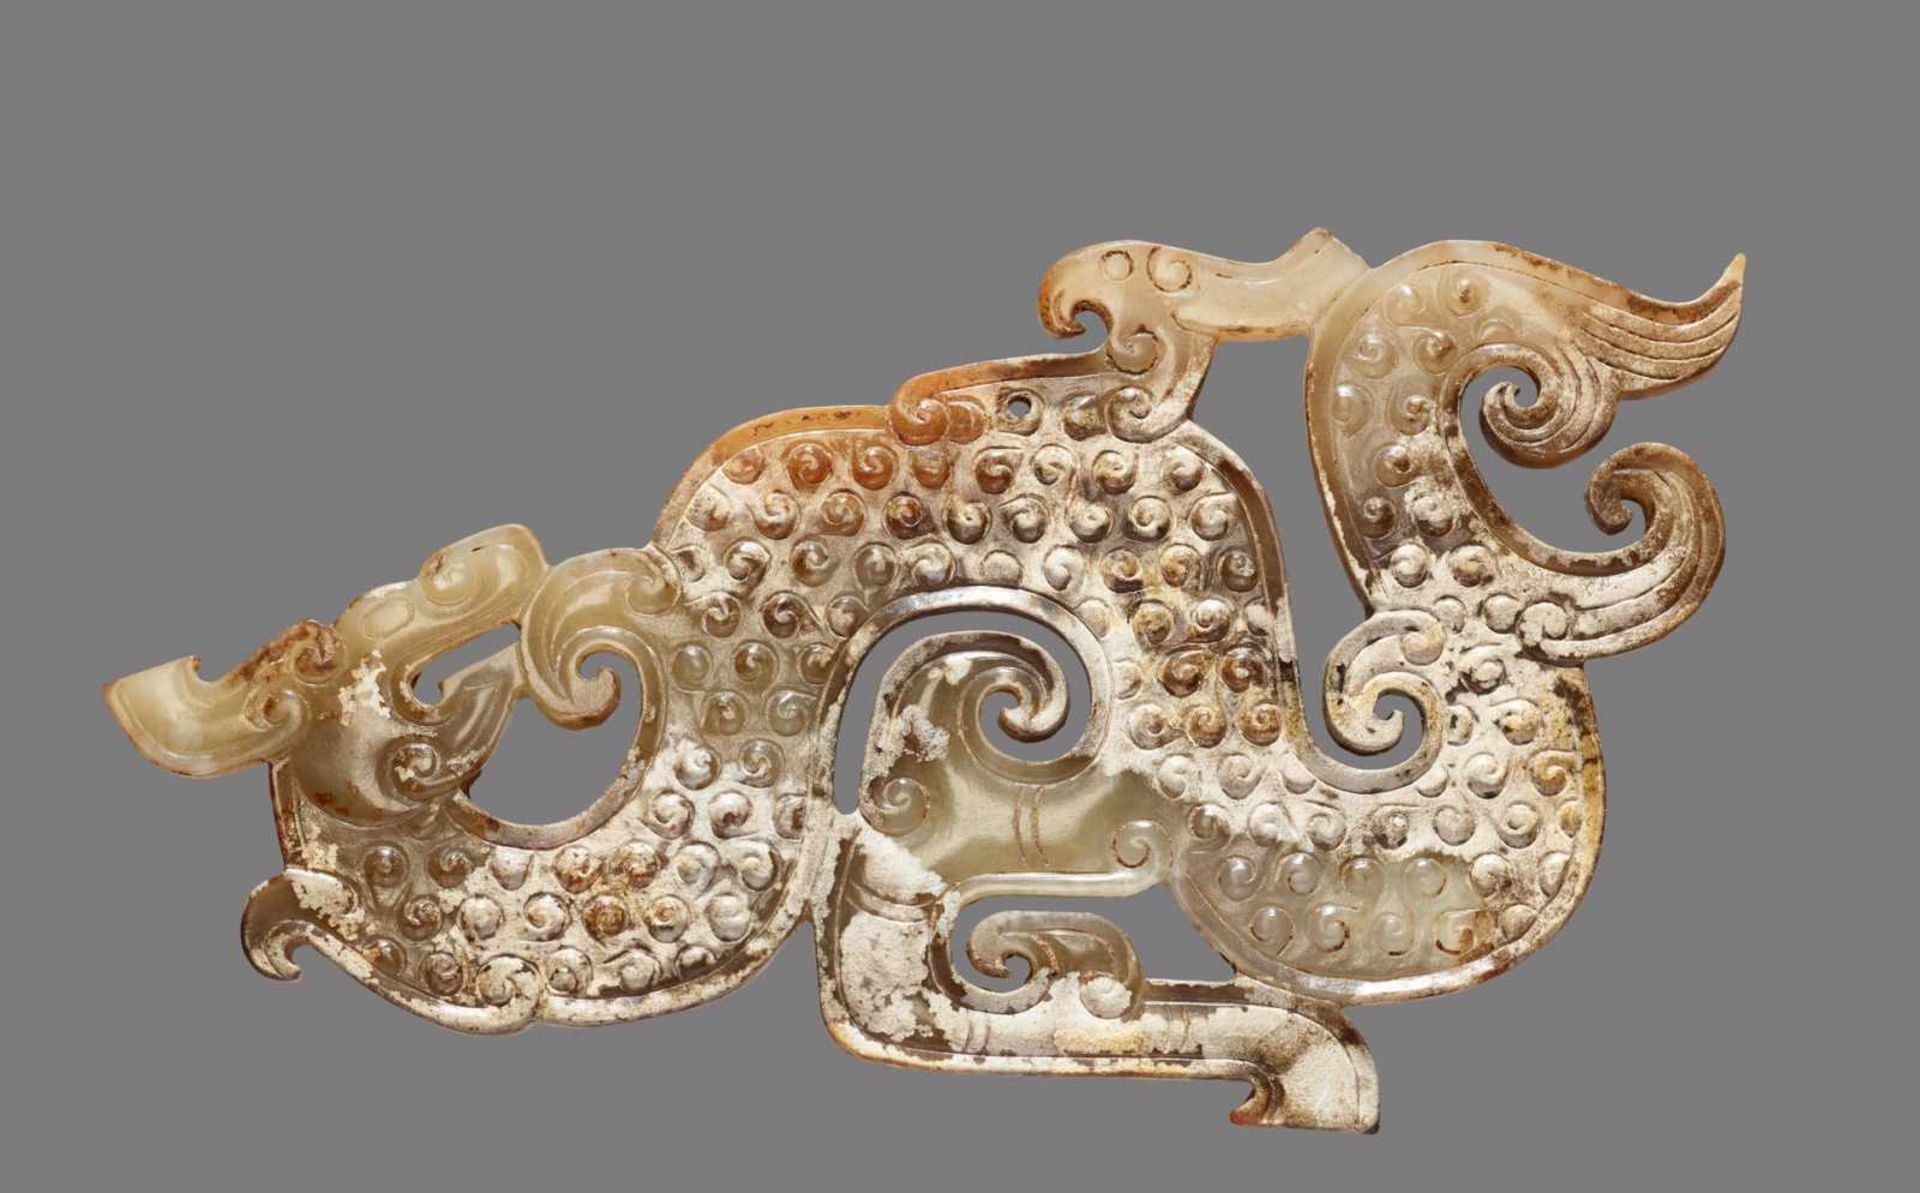 A SINUOUS S-SHAPED DRAGON WITH A PHOENIX AND CURLED APPENDAGES Jade. China, Eastern Zhou, 5th - - Image 3 of 10